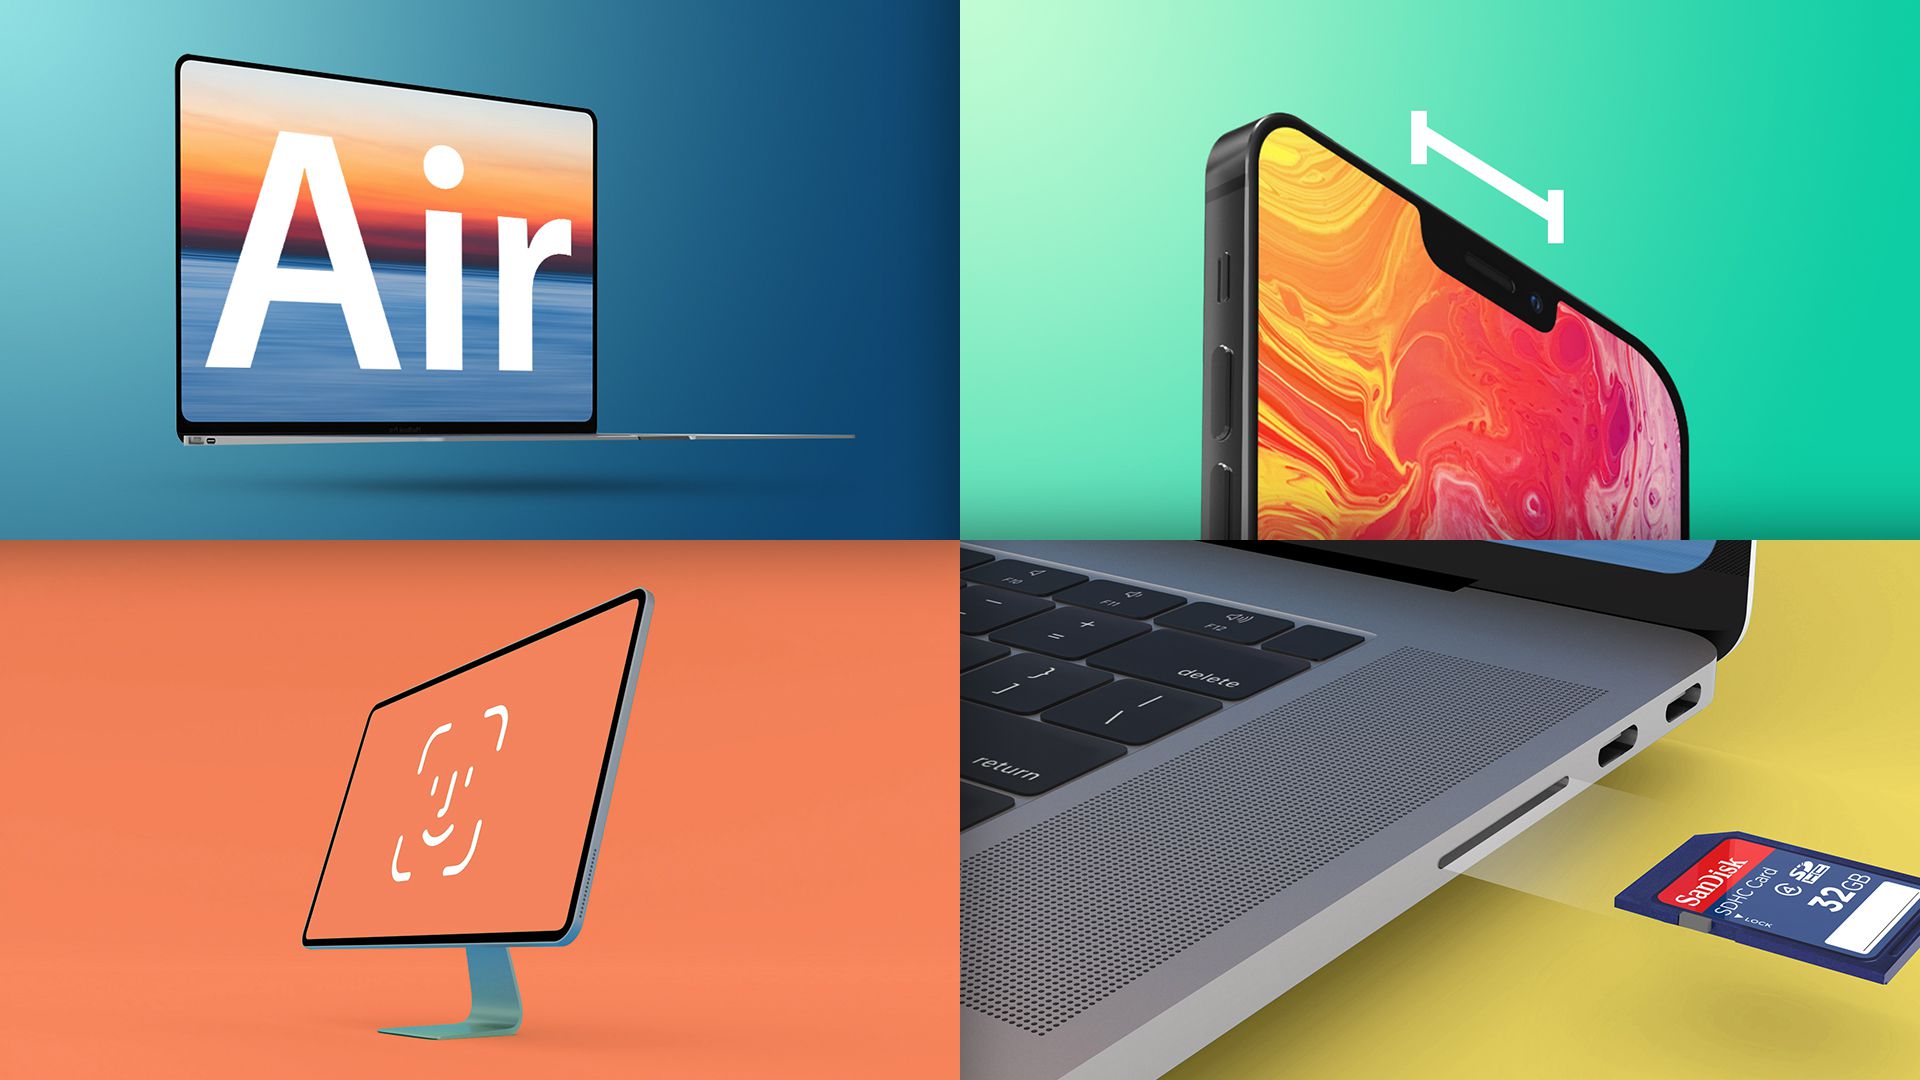 Headline news: MacBook Air is ‚thinner and lighter‘, iPhone 13 is smaller, iOS 14.4 in